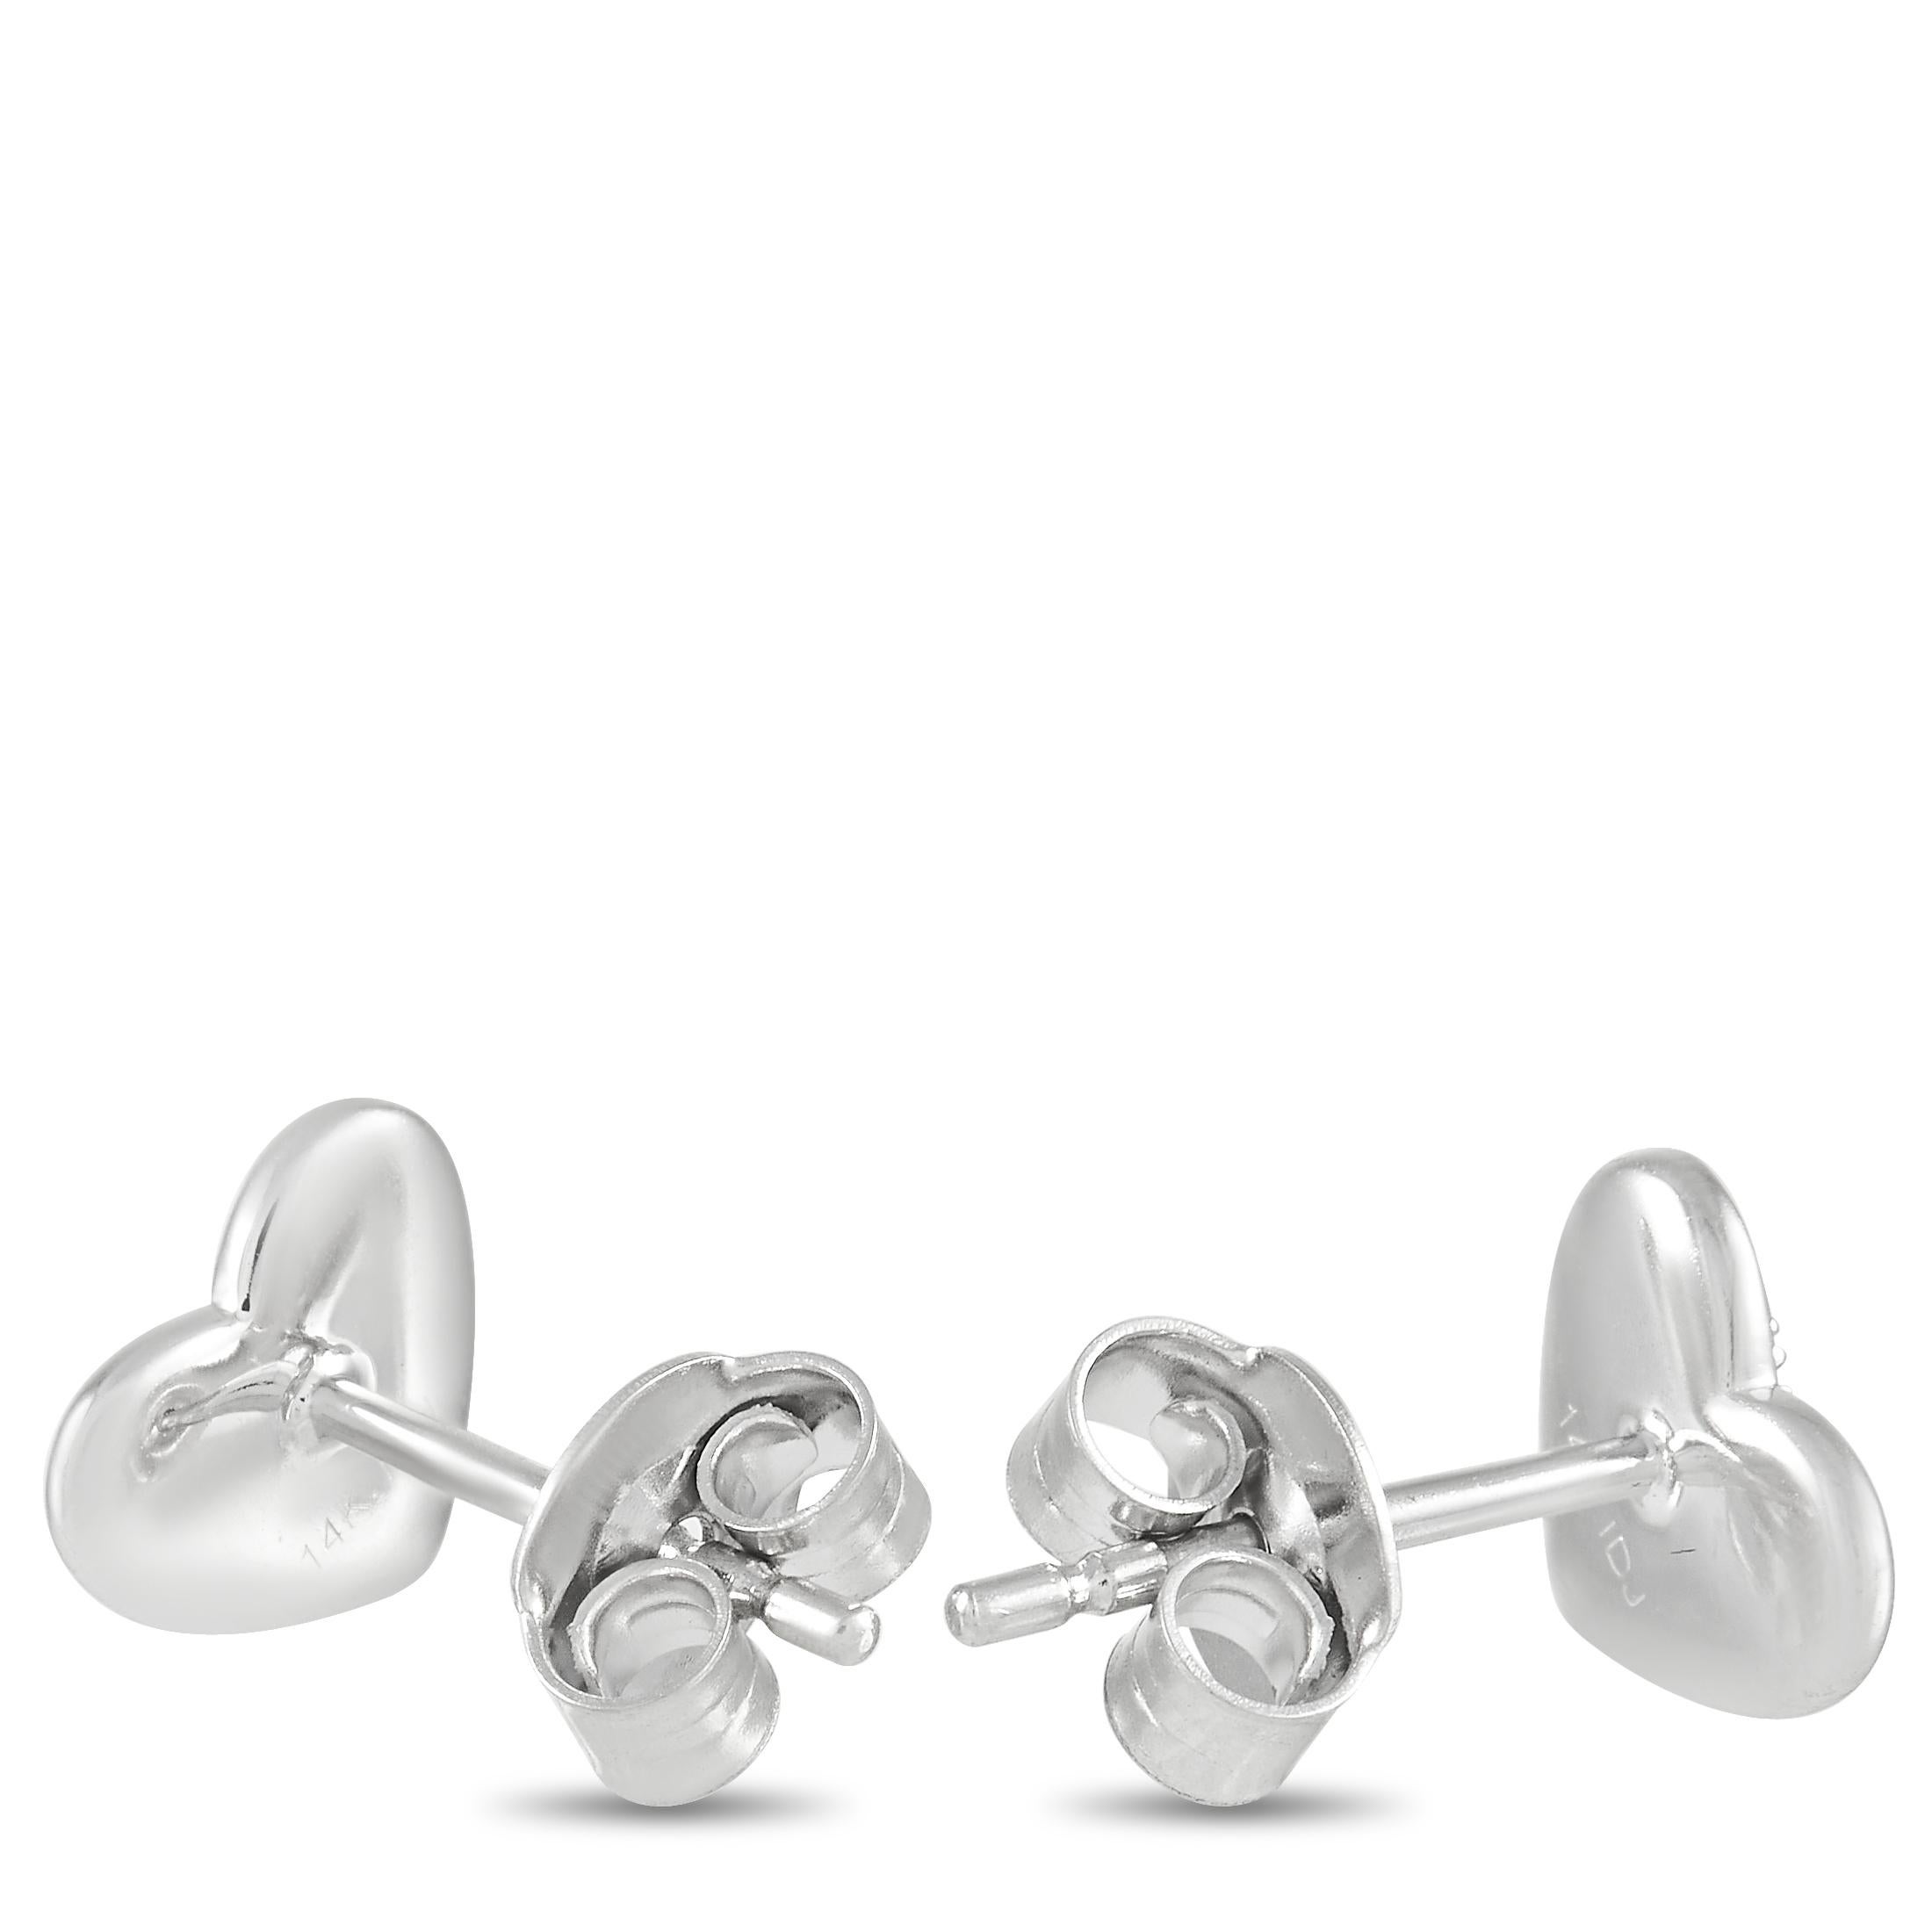 Sweet and stylish, these heart-shaped diamond earrings are incredibly charming. Each one is crafted from 14K White Gold and measures 0.45” round. Diamonds totaling 0.07 carats add a touch of sparkle to these elegant earrings. 
 
 This jewelry piece